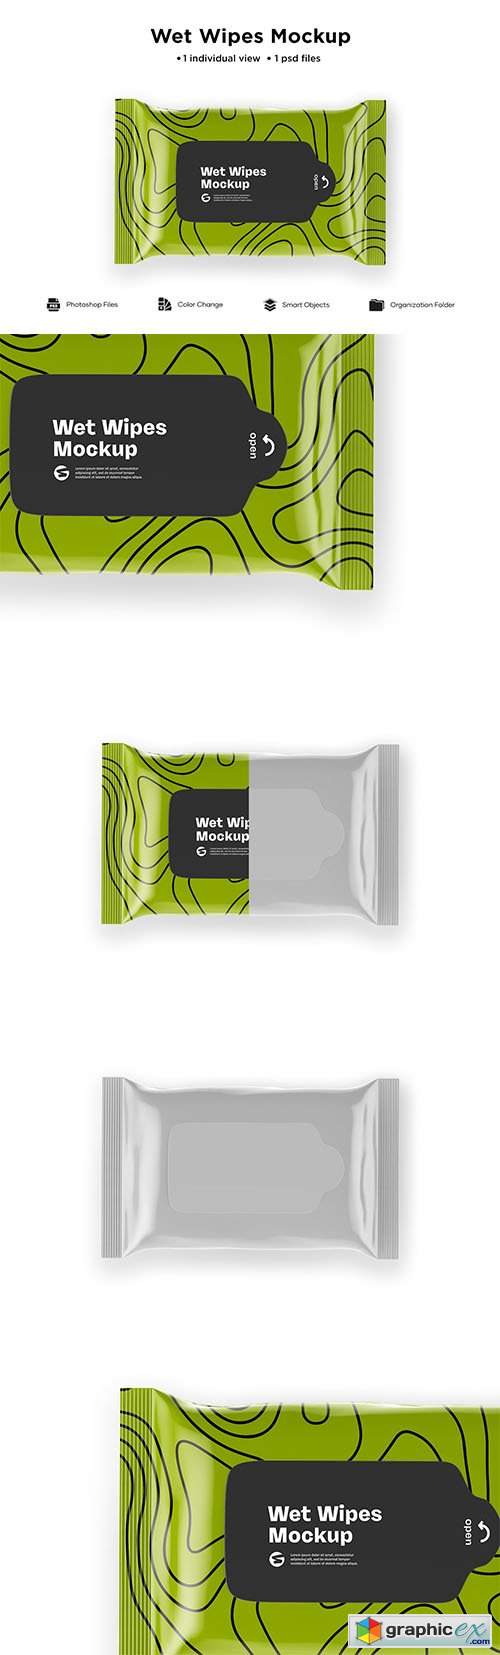 Download Metallic Wet Wipes Pack Mockup Free Download Vector Stock Image Photoshop Icon